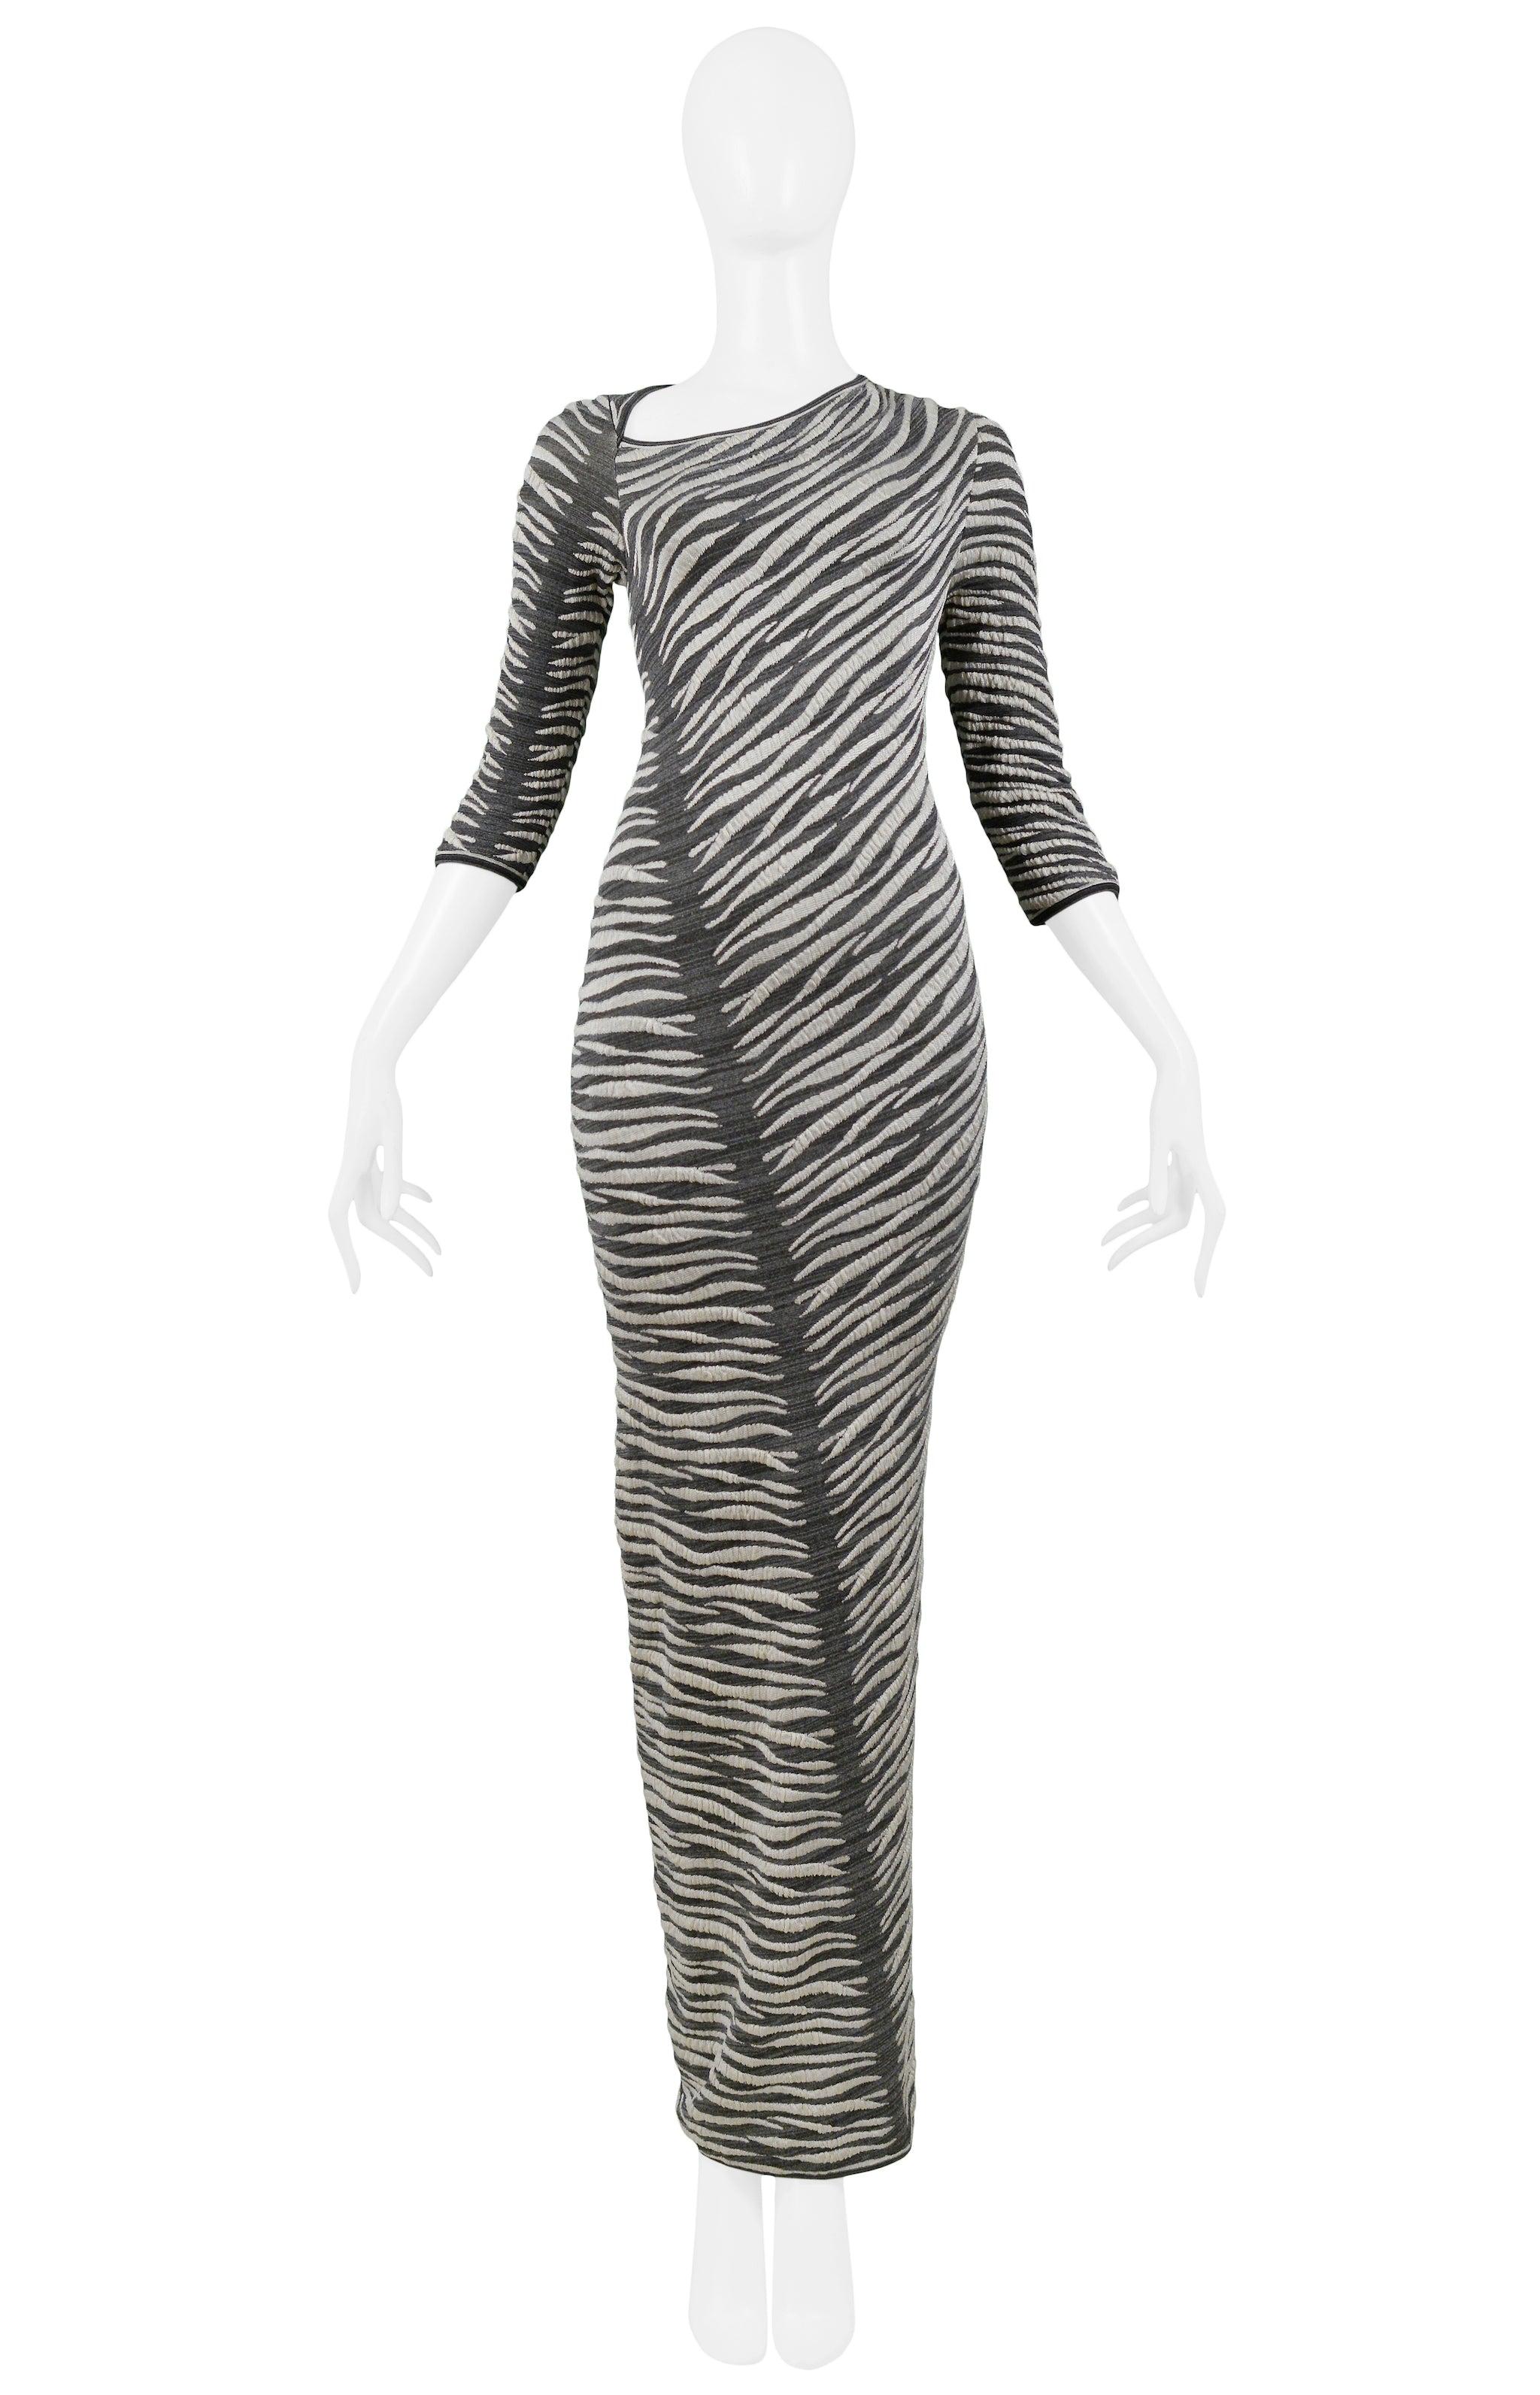 Resurrection is pleased to offer this vintage Gianfranco Ferre grey and white embroidered zebra stripe maxi dress featuring an asymmetrical neckline, three-quarter length sleeves, and diagonal stitch detail down the center back to the